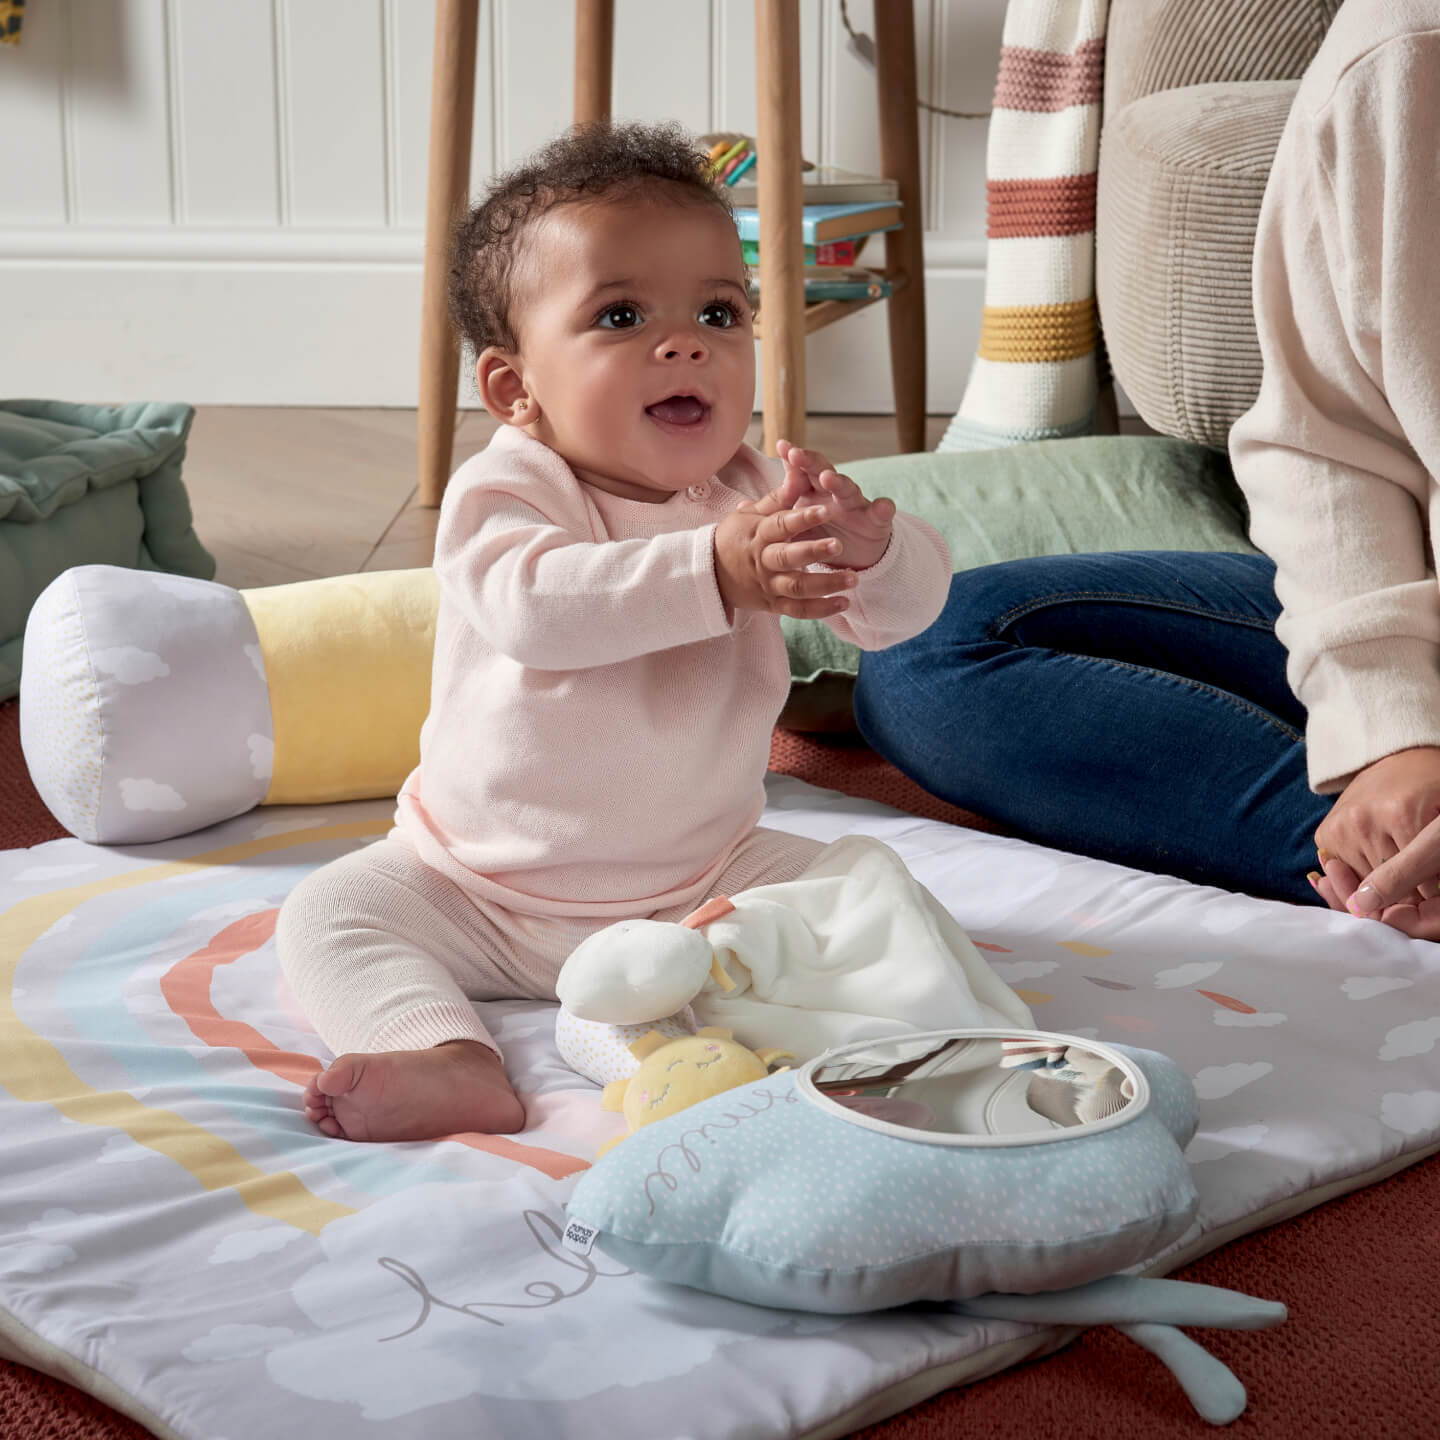 Baby sat clapping on a printed playmat